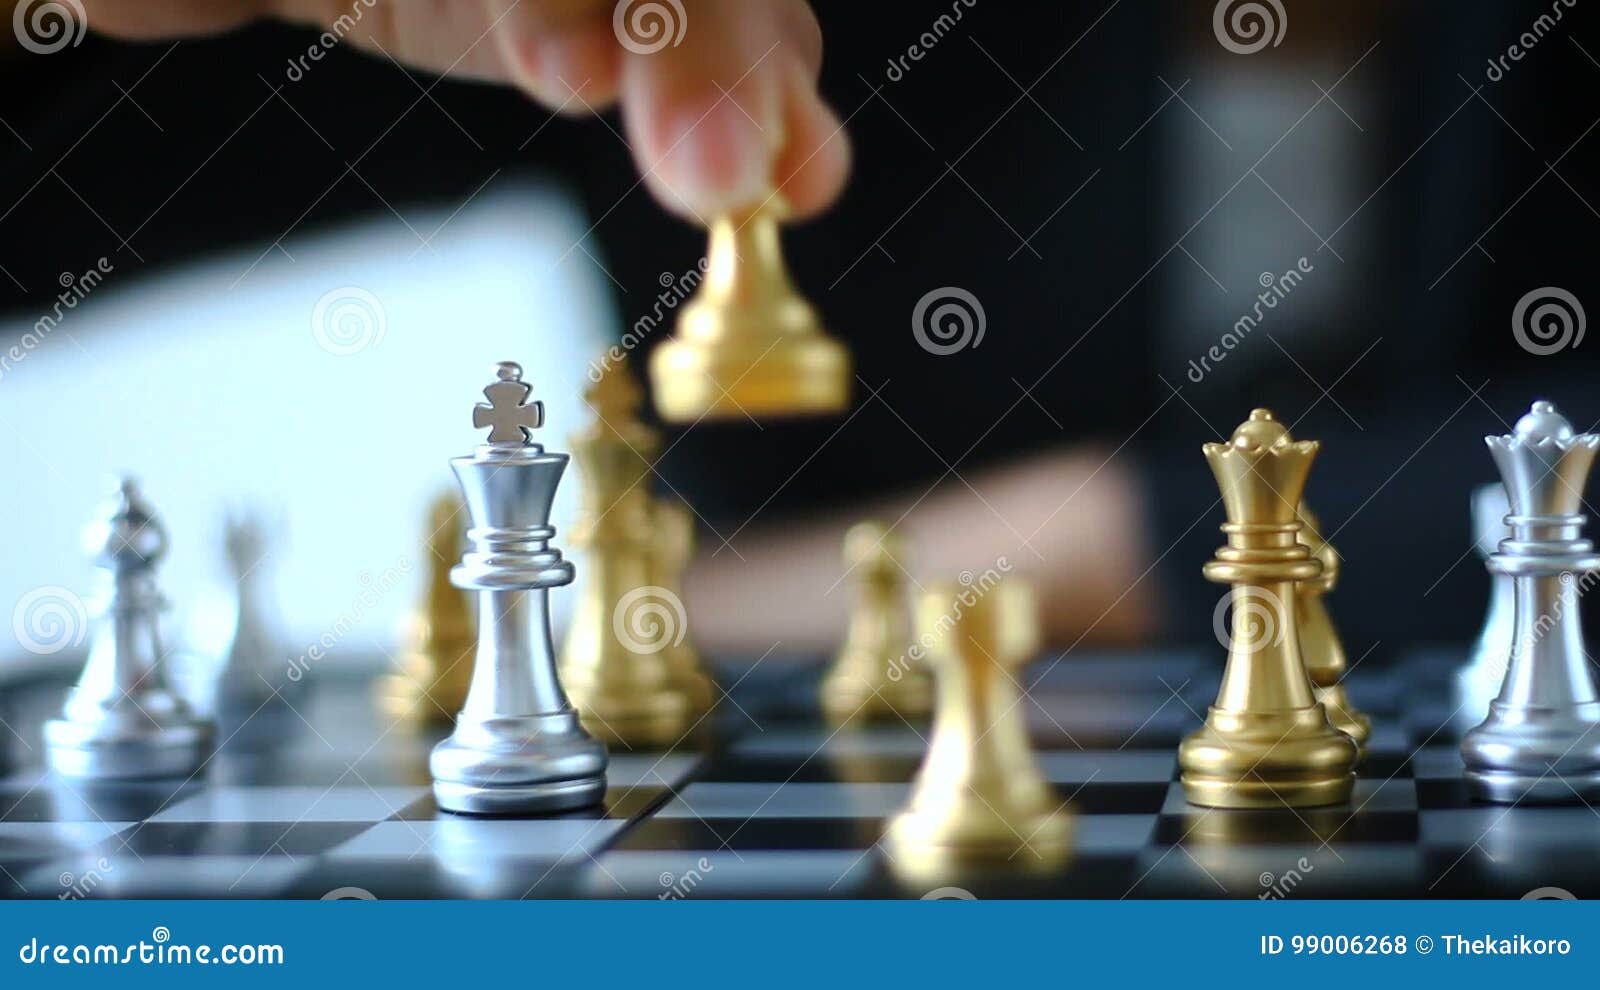 How To Kill The King In Chess